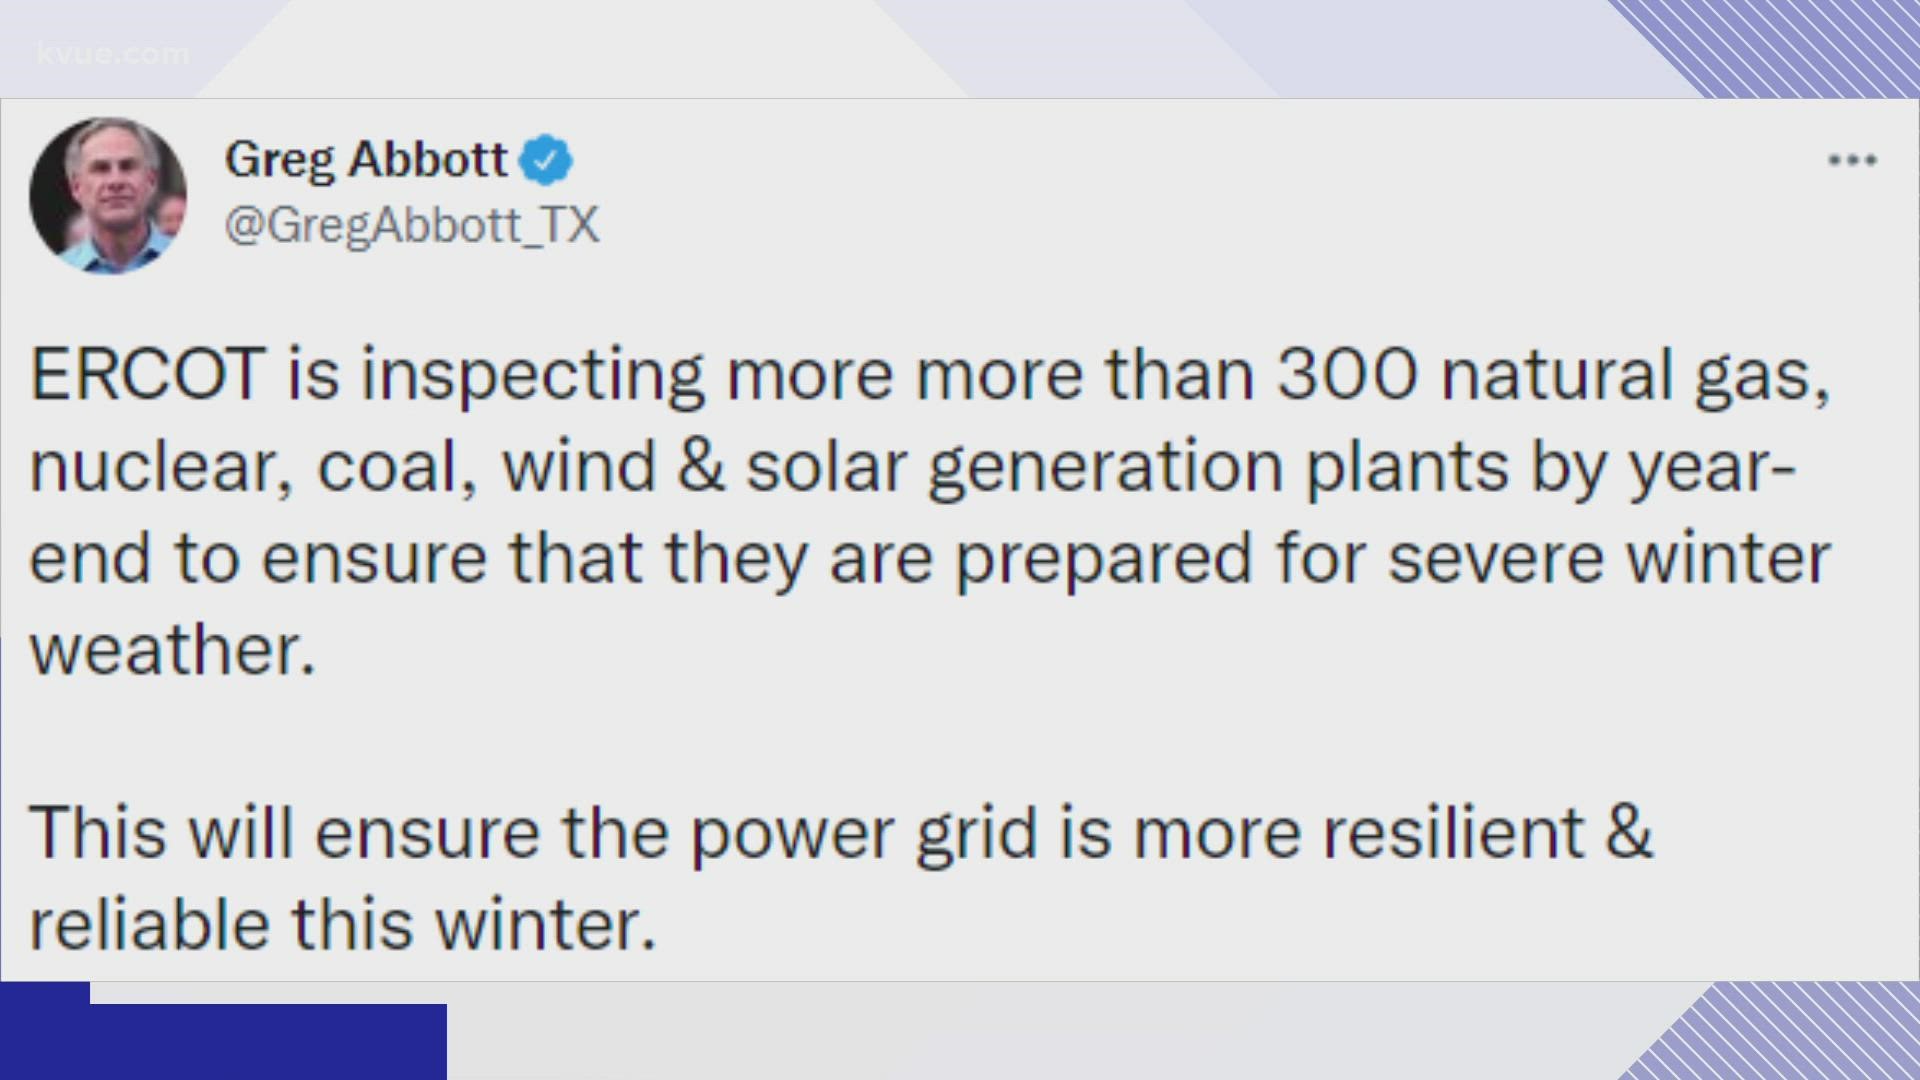 The governor tweeted Sunday, looking to assure Texans that ERCOT is working to prevent winter power outages if severe winter weather returns this year.